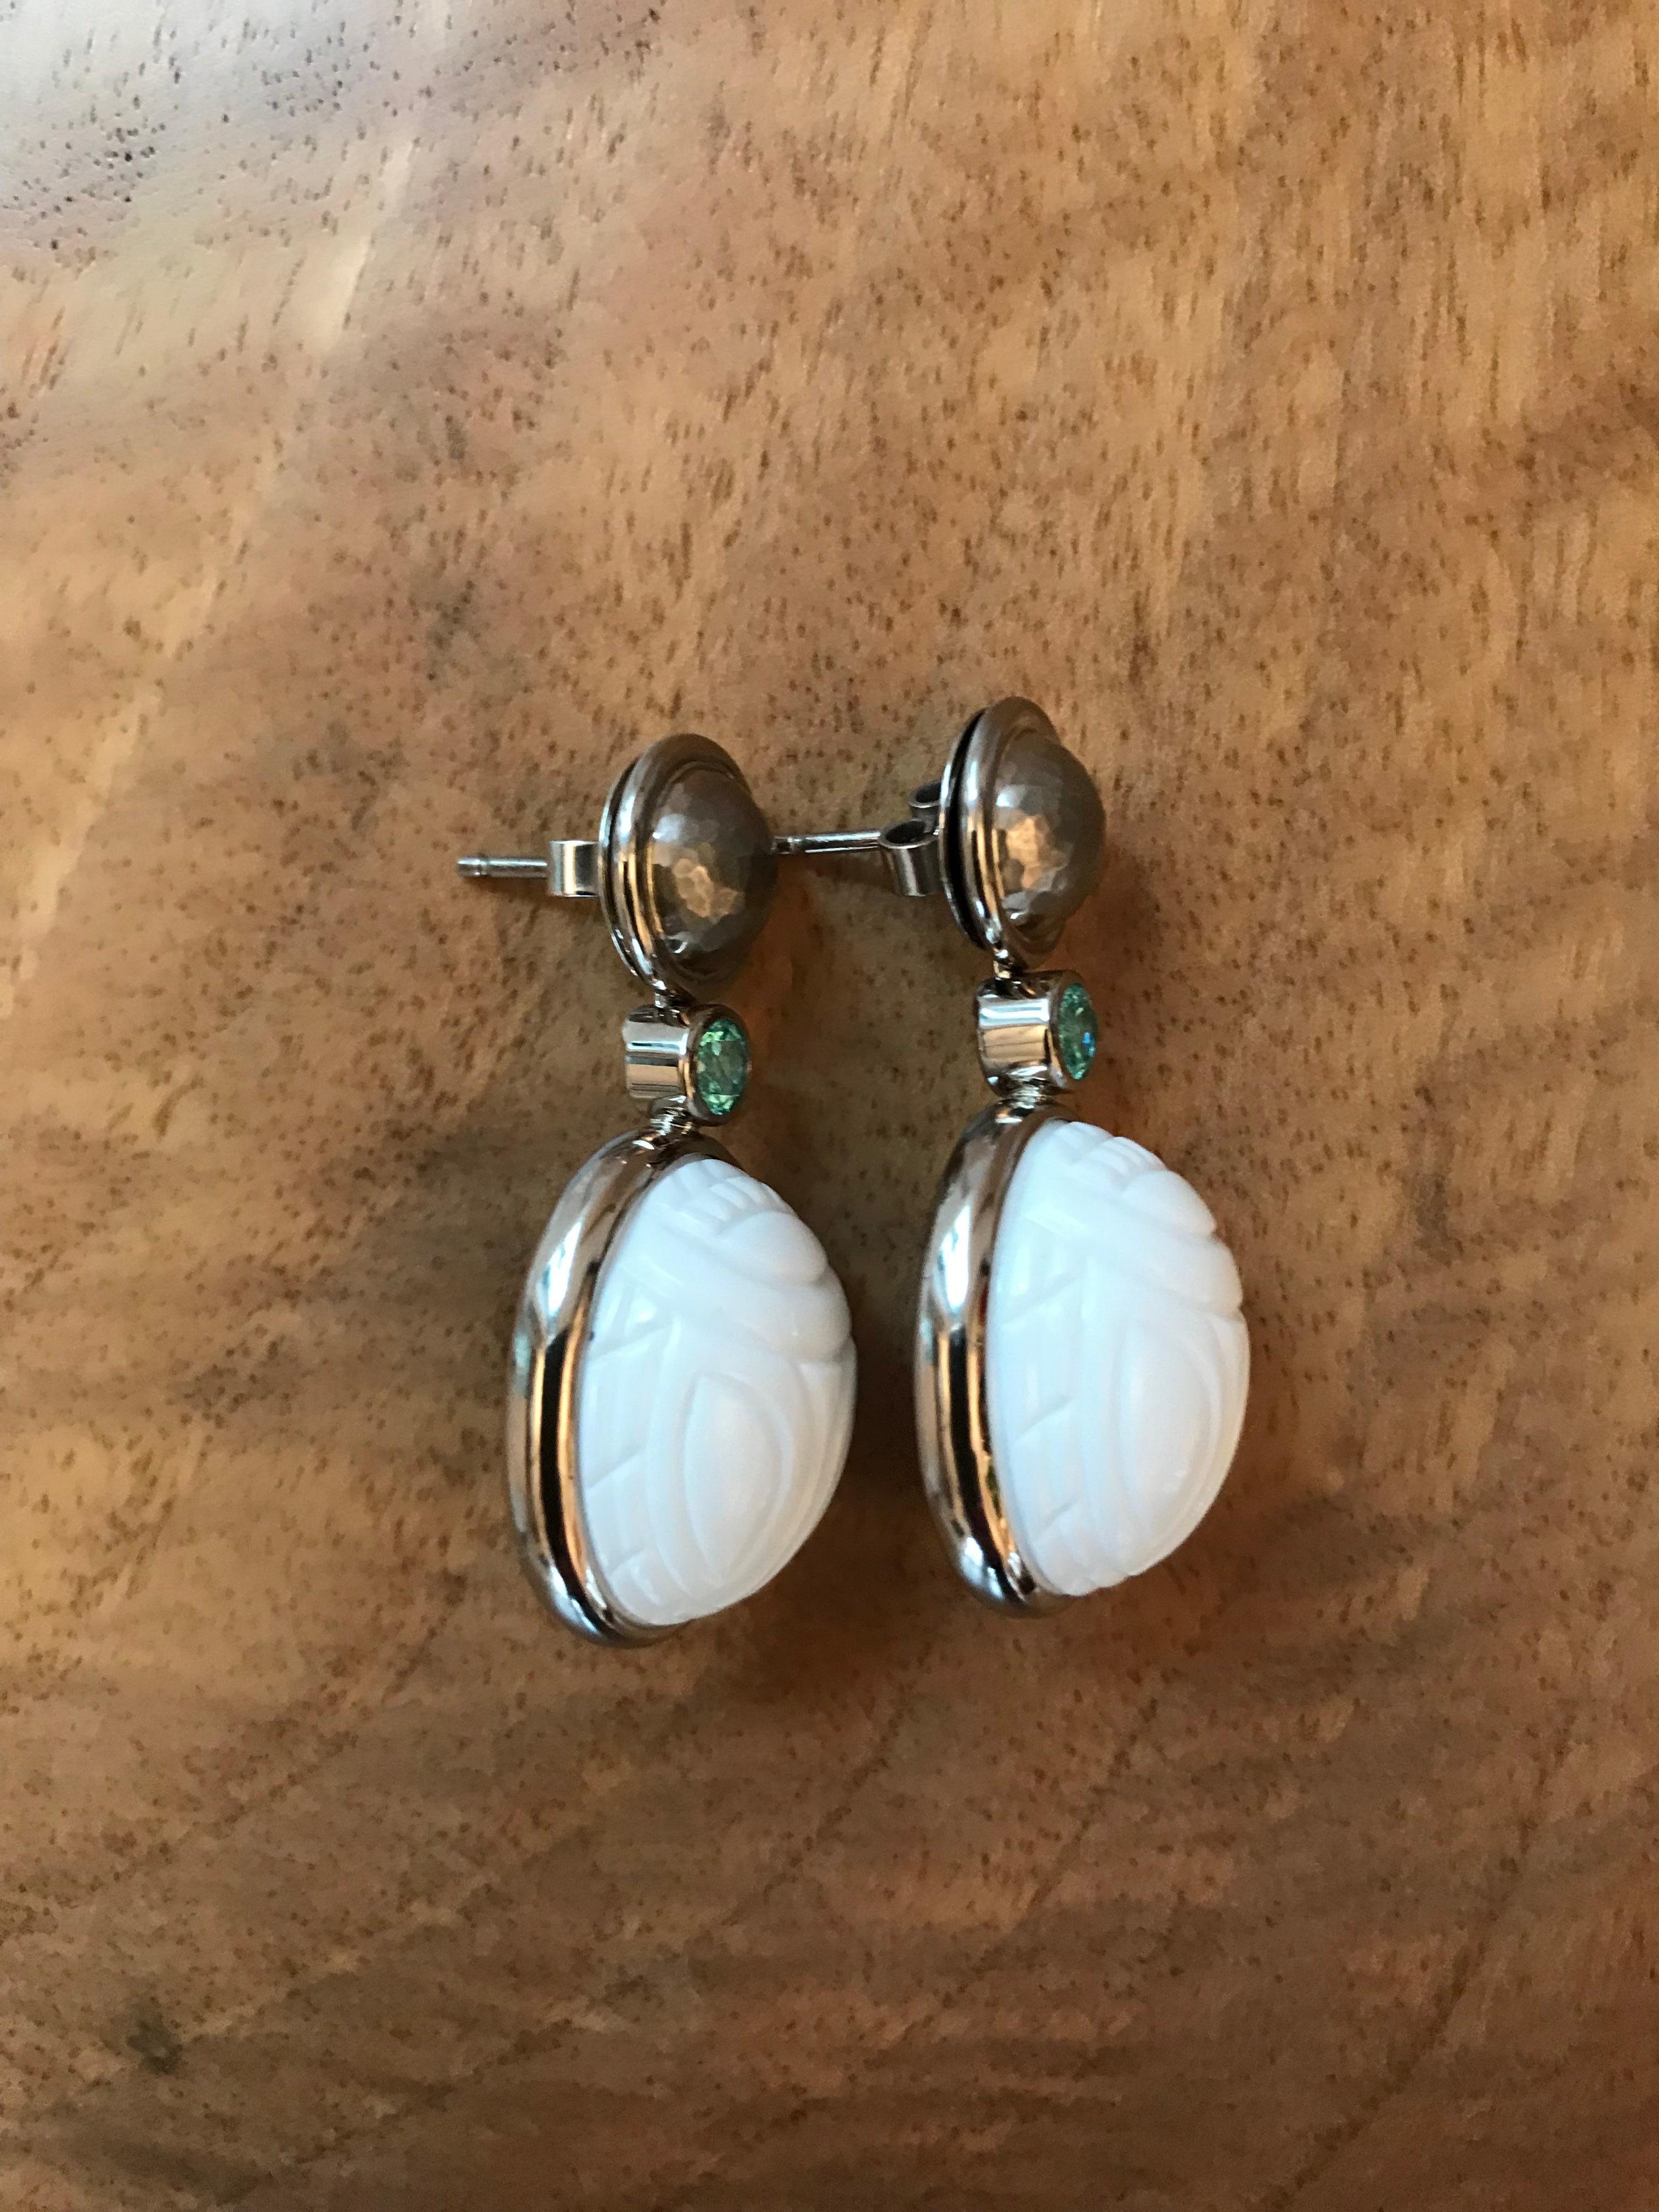 A pair of white gold dangle earrings with two cacholong scarabs 31.66 ct and two african paraiba tourmalines 0.53 ct. Just beautiful.
Designed by Colleen B. Rosenblat